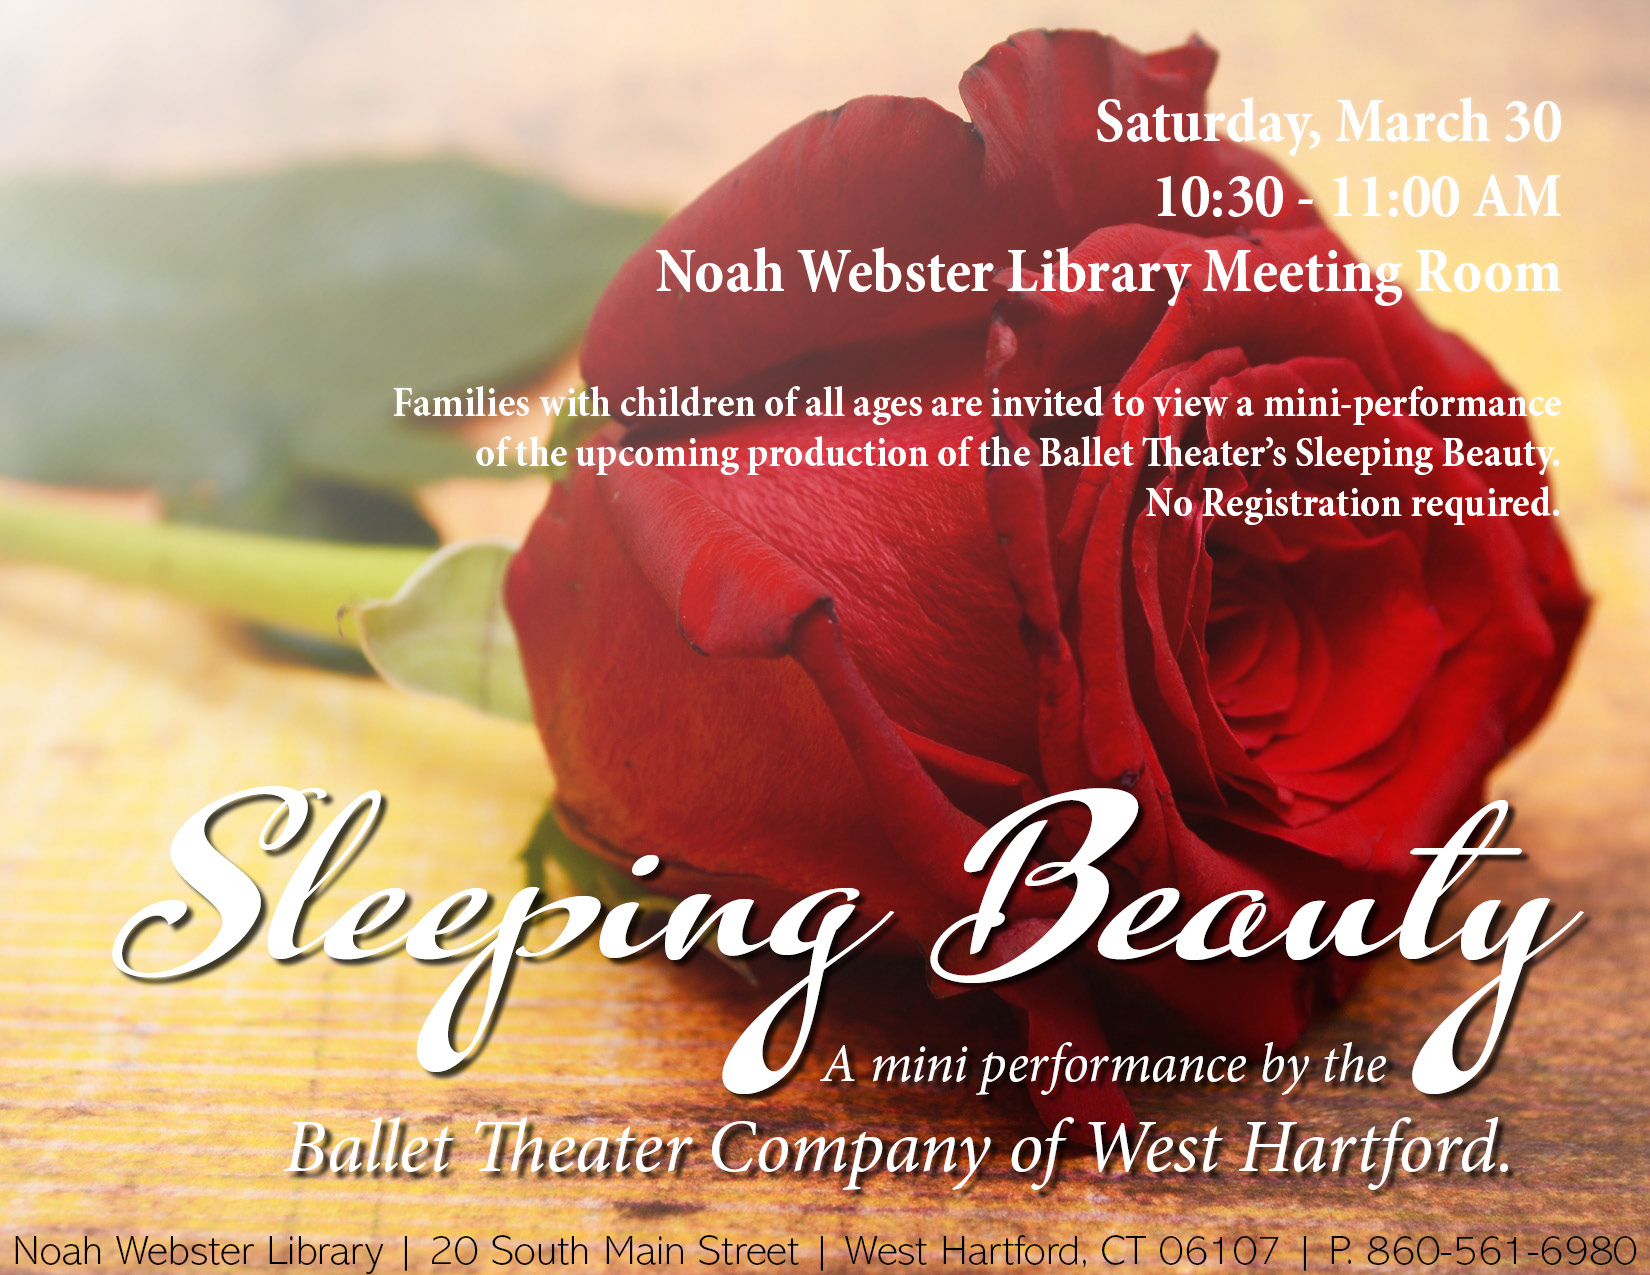 Flyer - Mini-Performance at Noah Webster Library